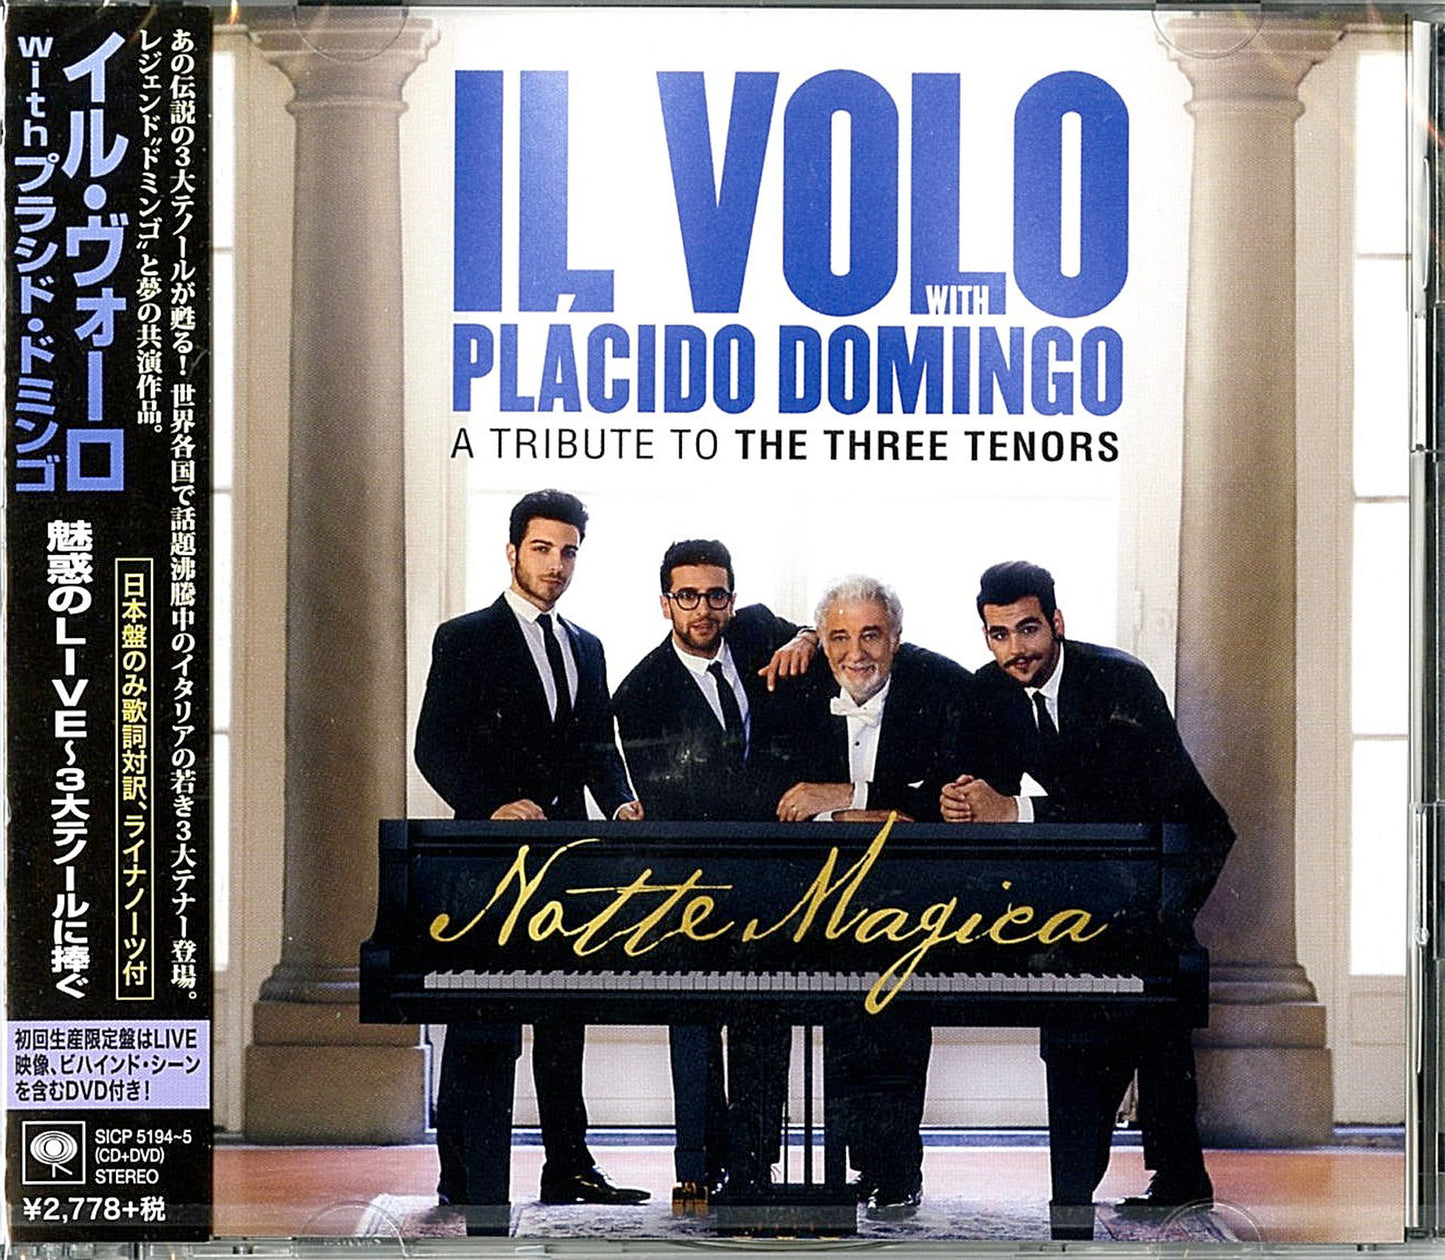 Il Volo With Placido Domingo - Notte Magica &#8211; A Tribute To The Three Tenors - Japan  CD+DVD Bonus Track Limited Edition